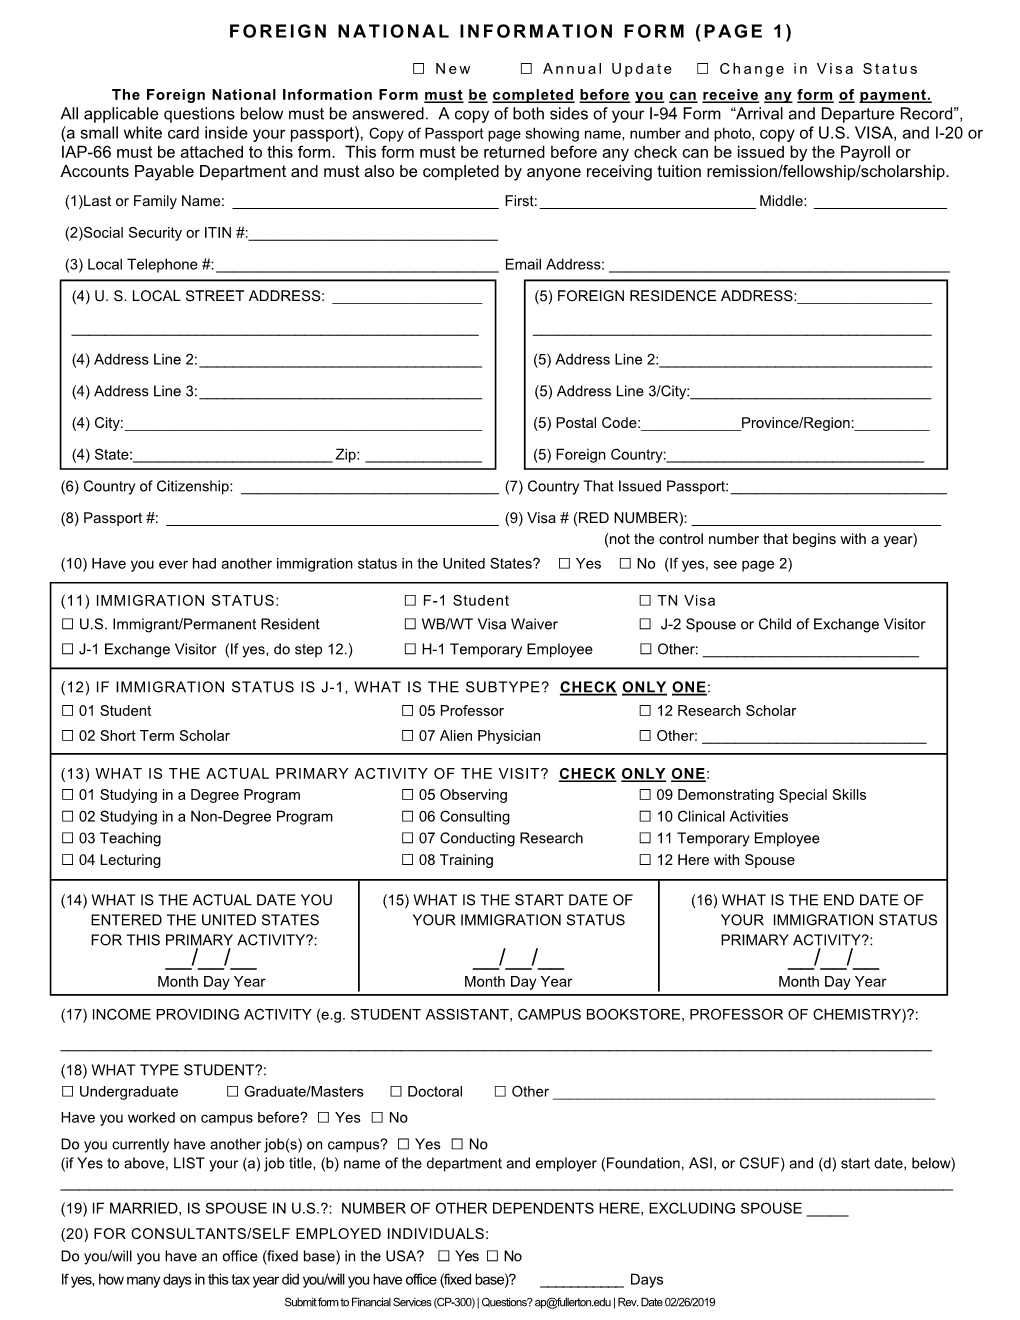 Foreign National Information Form (Page 1)